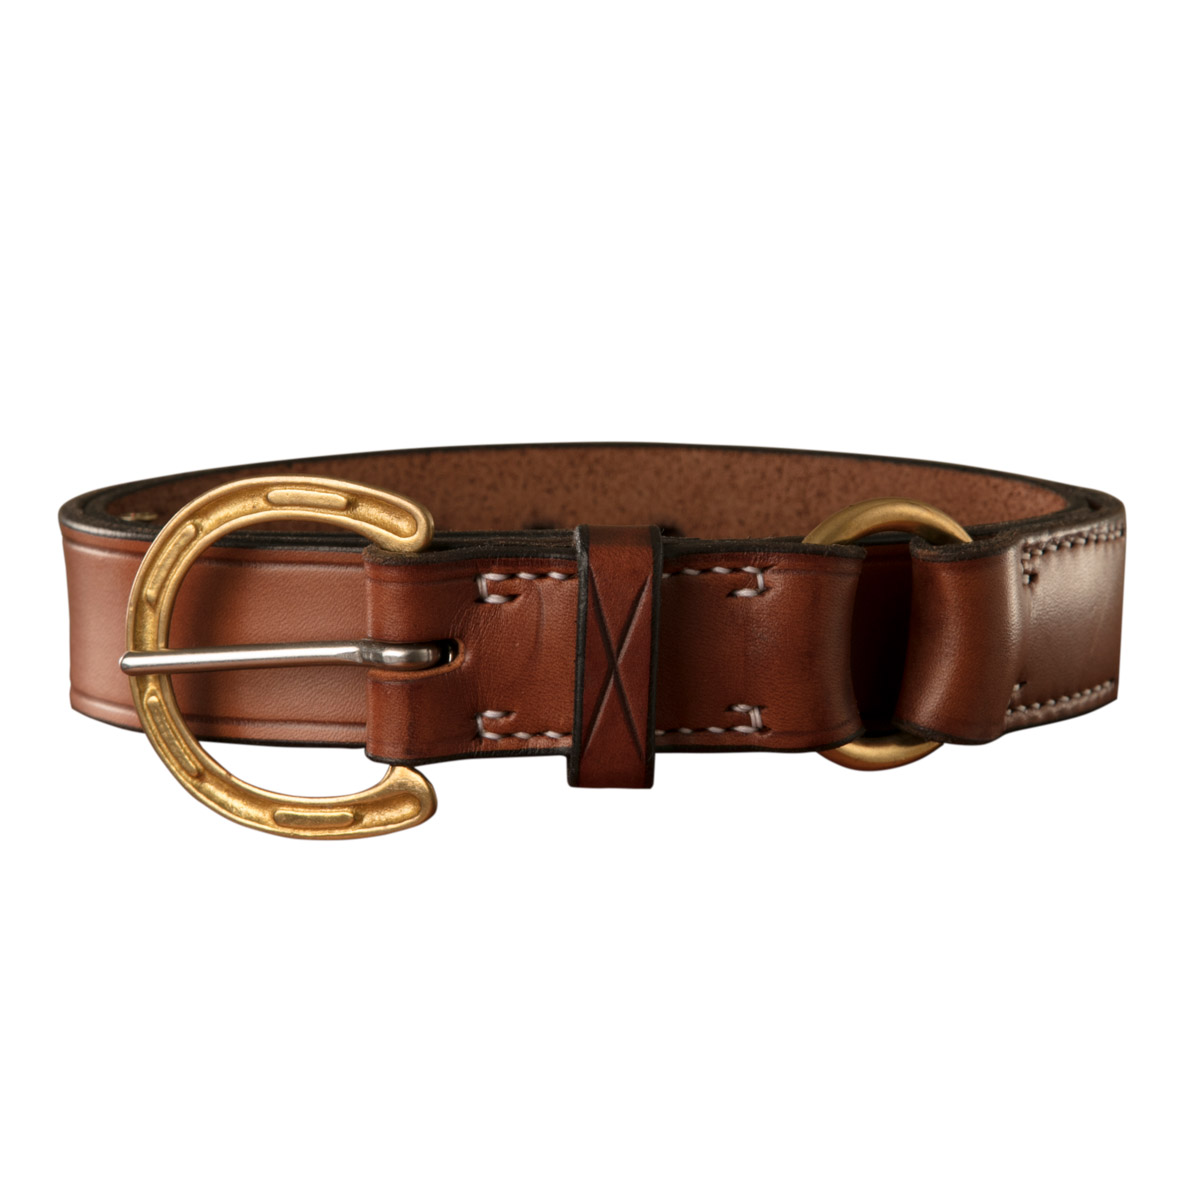 Stockmans Belt, Solid Leather, with Brass Horseshoe Buckle and Ring 1